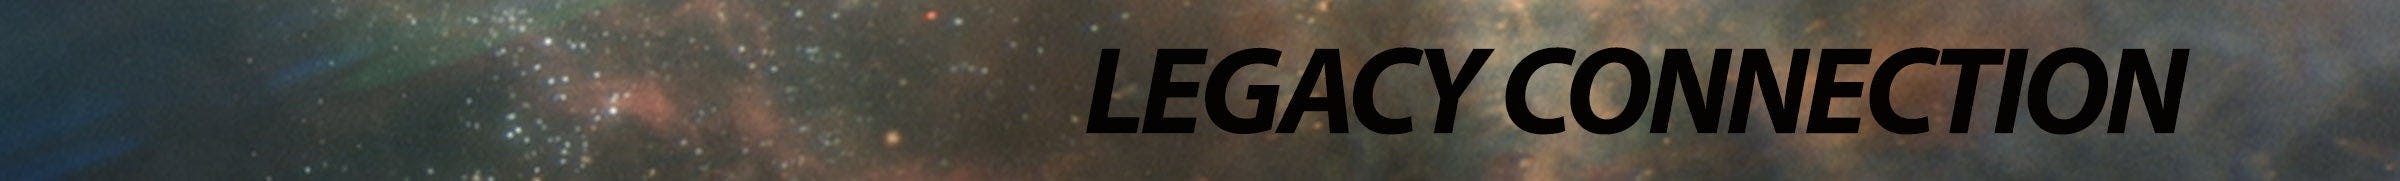 Banner with text 'Legacy Connection'